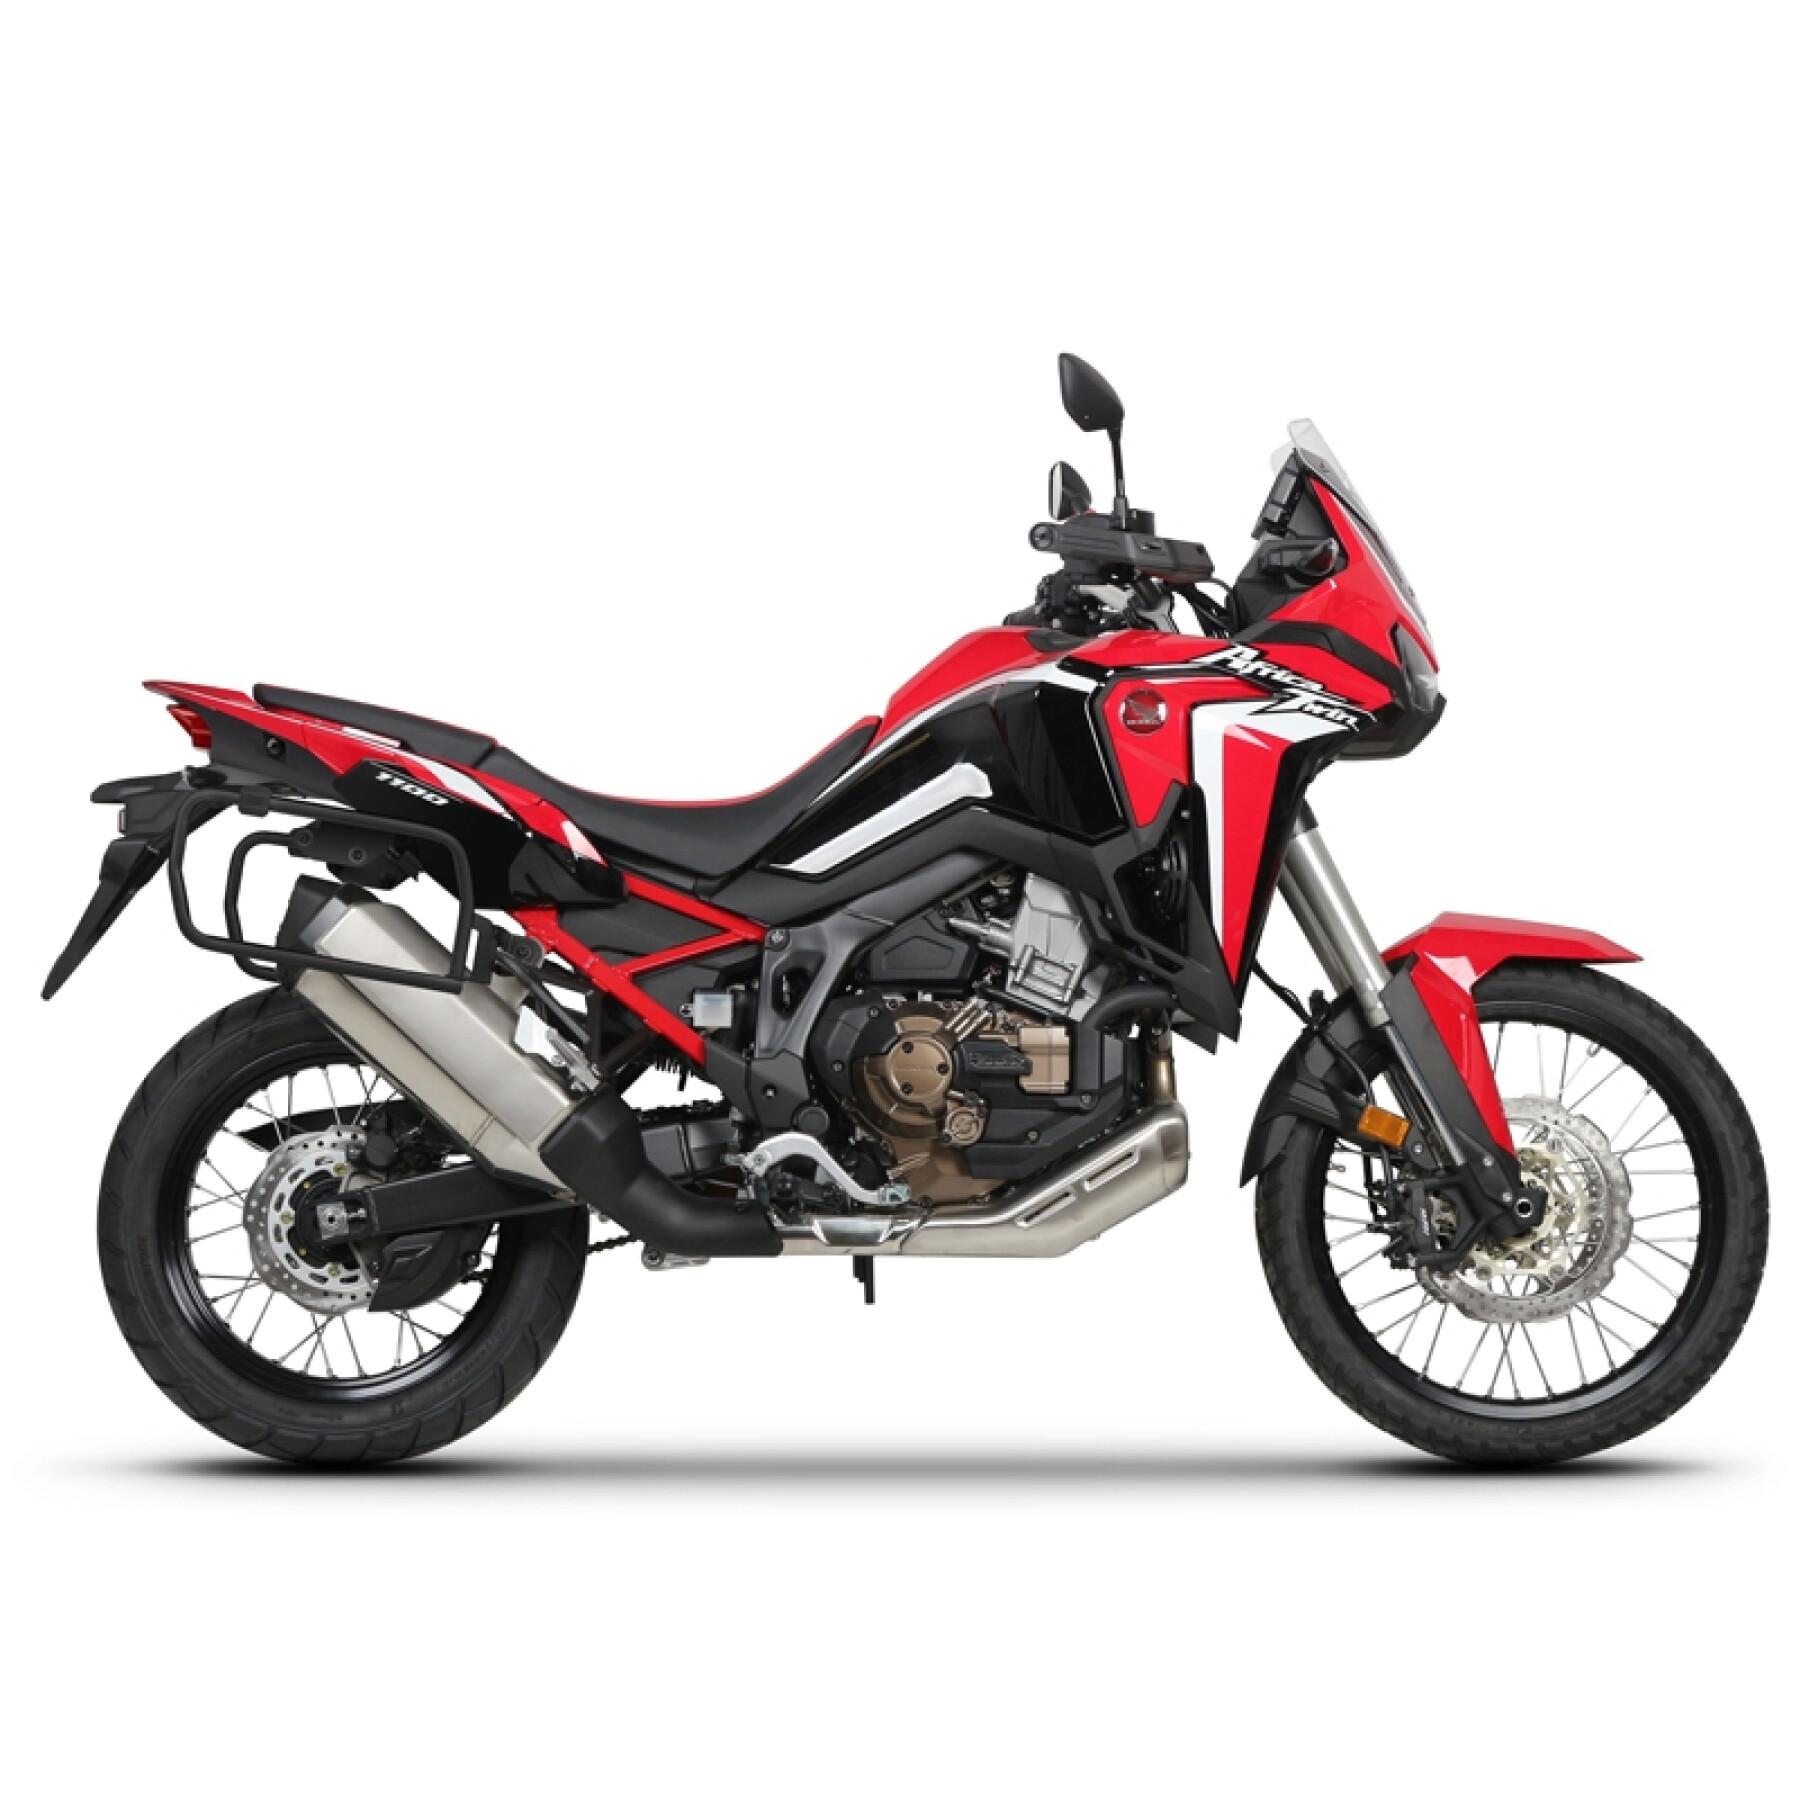 Support valises latérales moto Shad 4P System Honda Crf 1100 L Africa Twin 2020-2020